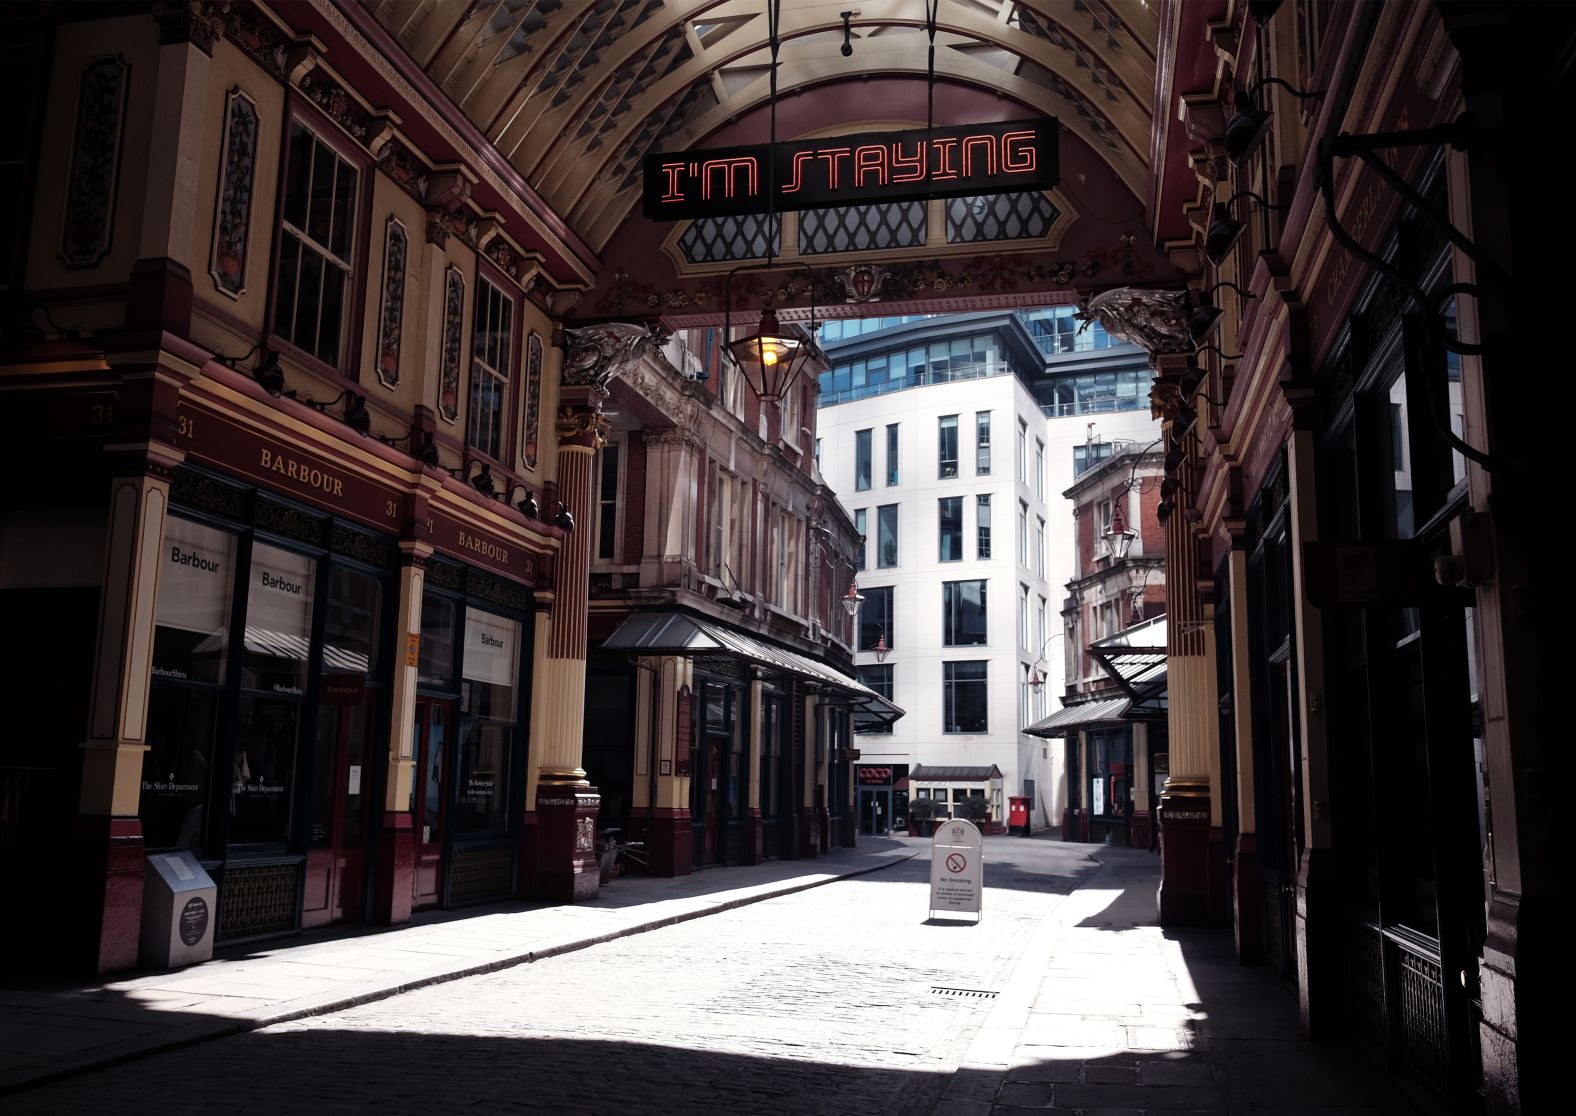 London's Leadenhall Market is seen in March, a day after Prime Minister Boris Johnson <a href="https://www.cnn.com/2020/03/23/uk/uk-coronavirus-lockdown-gbr-intl/index.html" target="_blank">issued a stay-at-home order</a> for the United Kingdom.